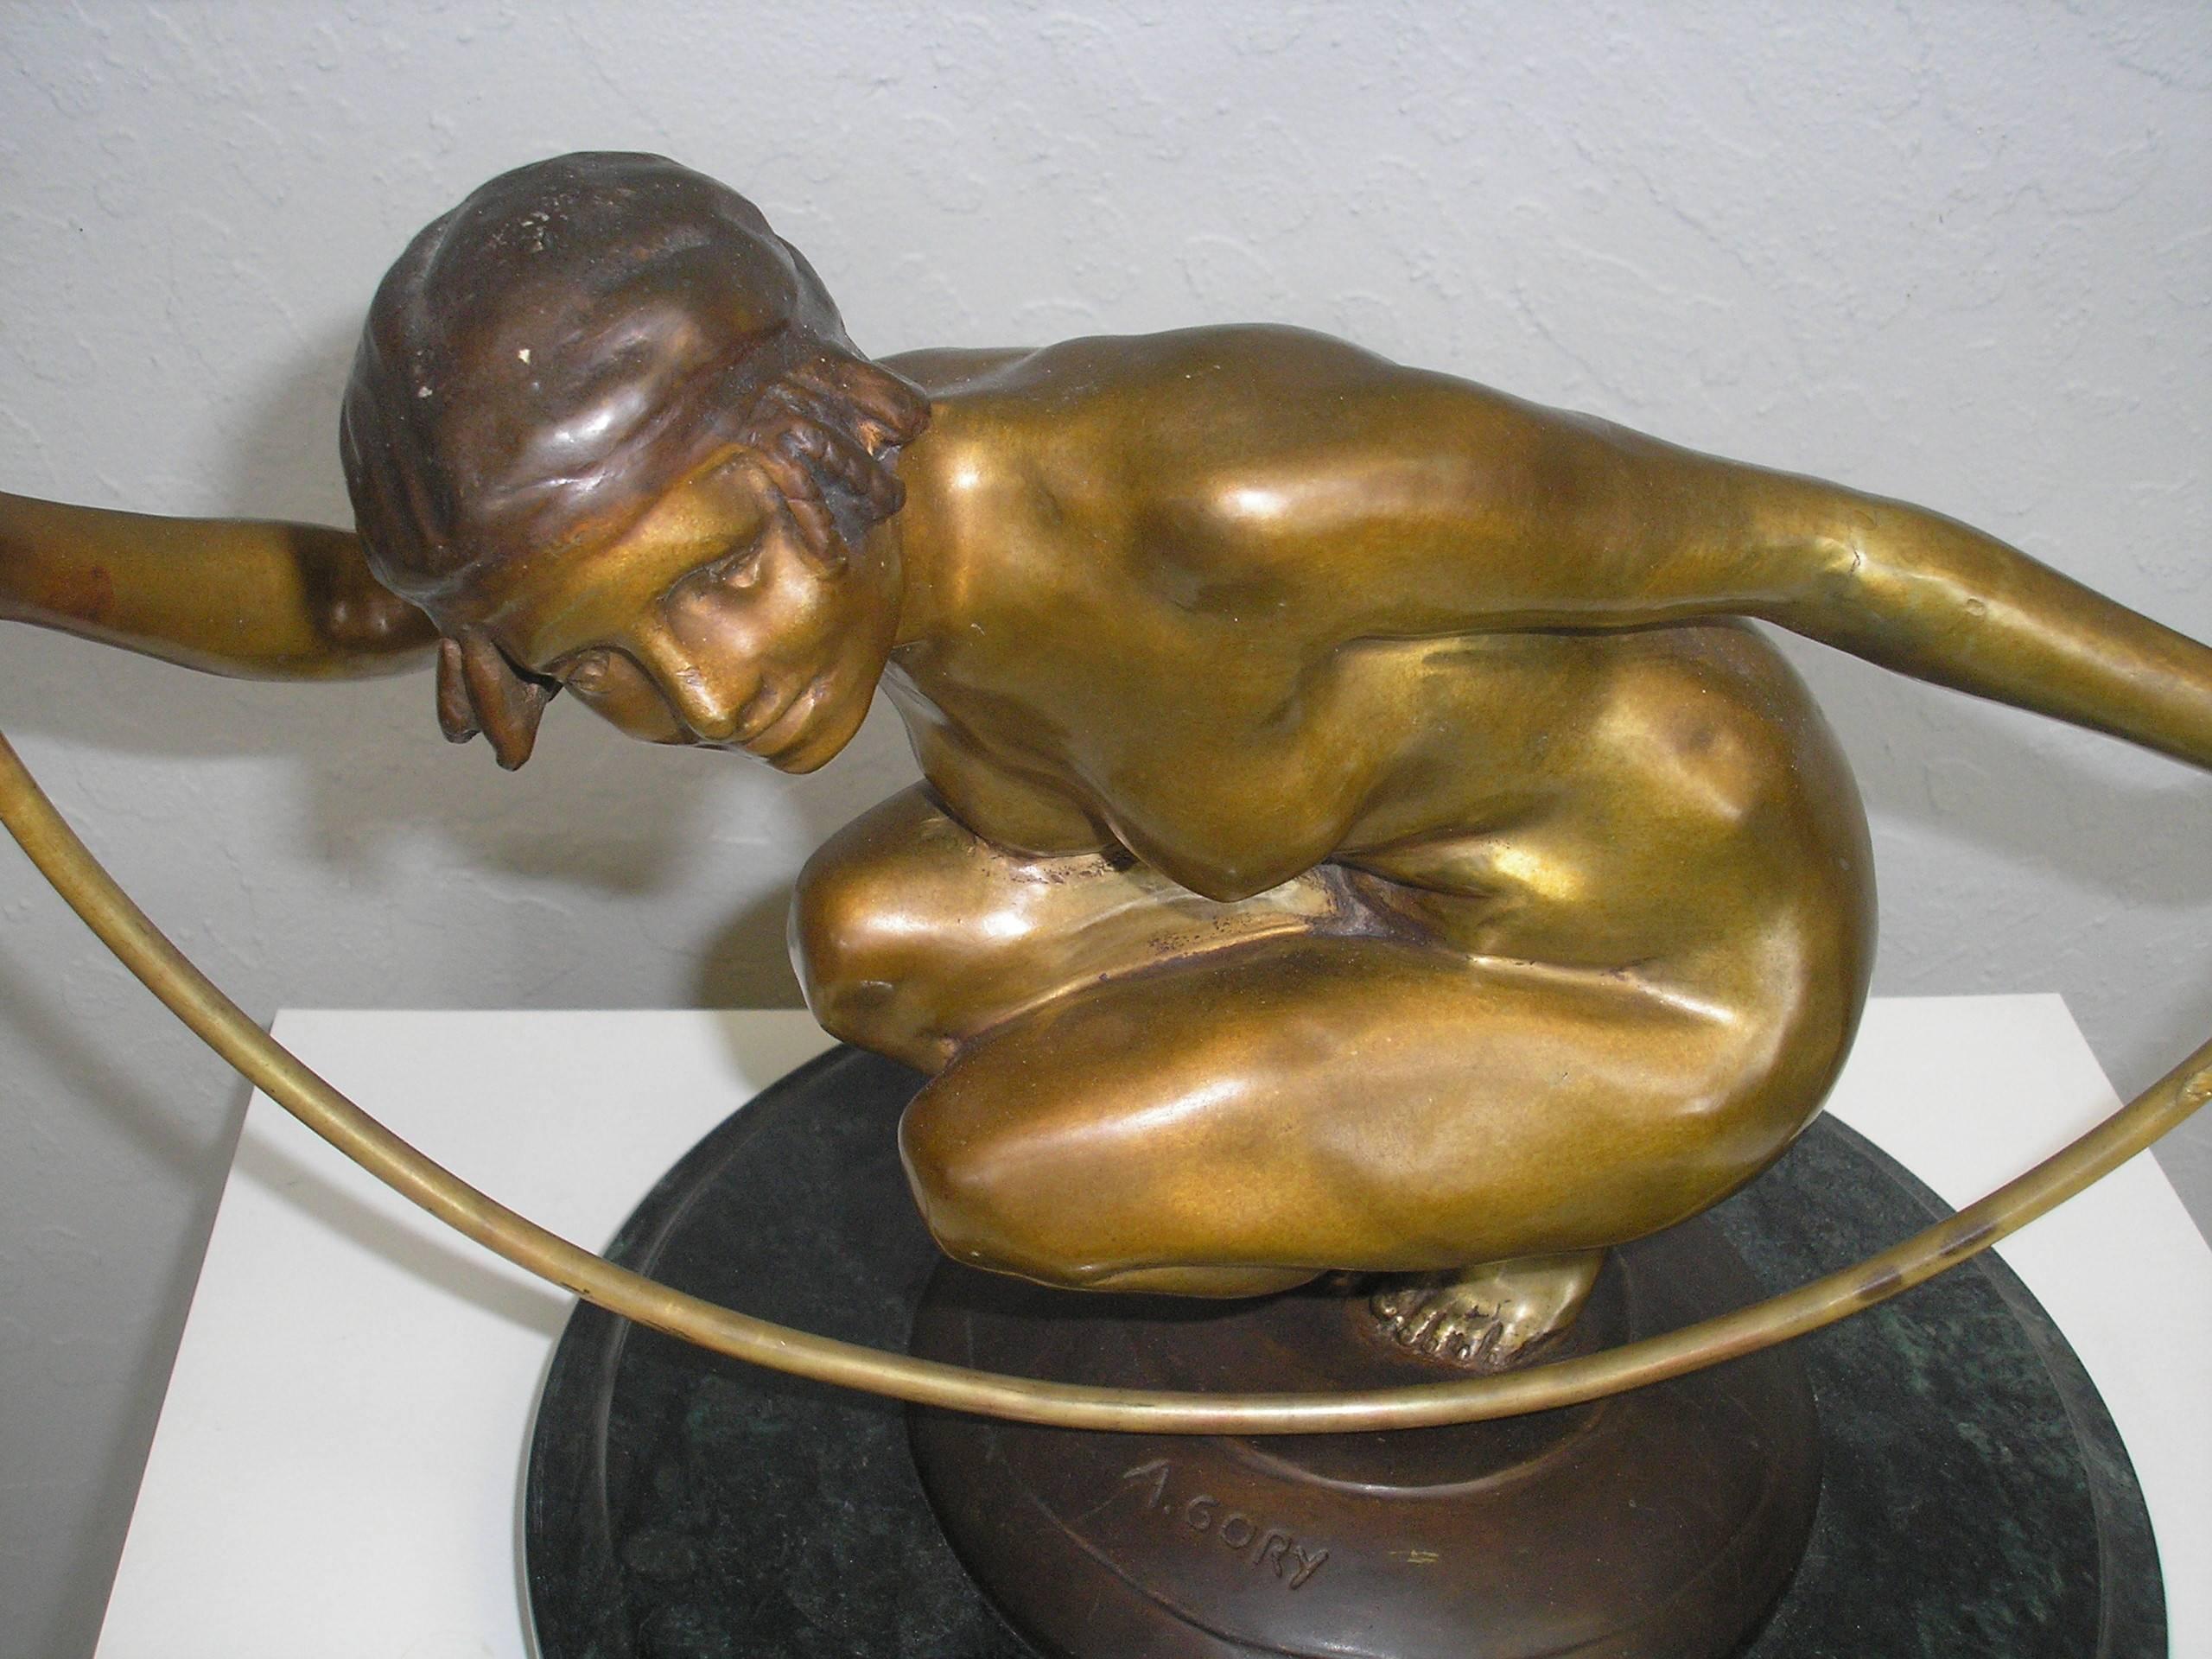 Art Deco bronze by A. Gory., circa 1920. Nude with ring. Signed on base of sculpture. Green marble base.